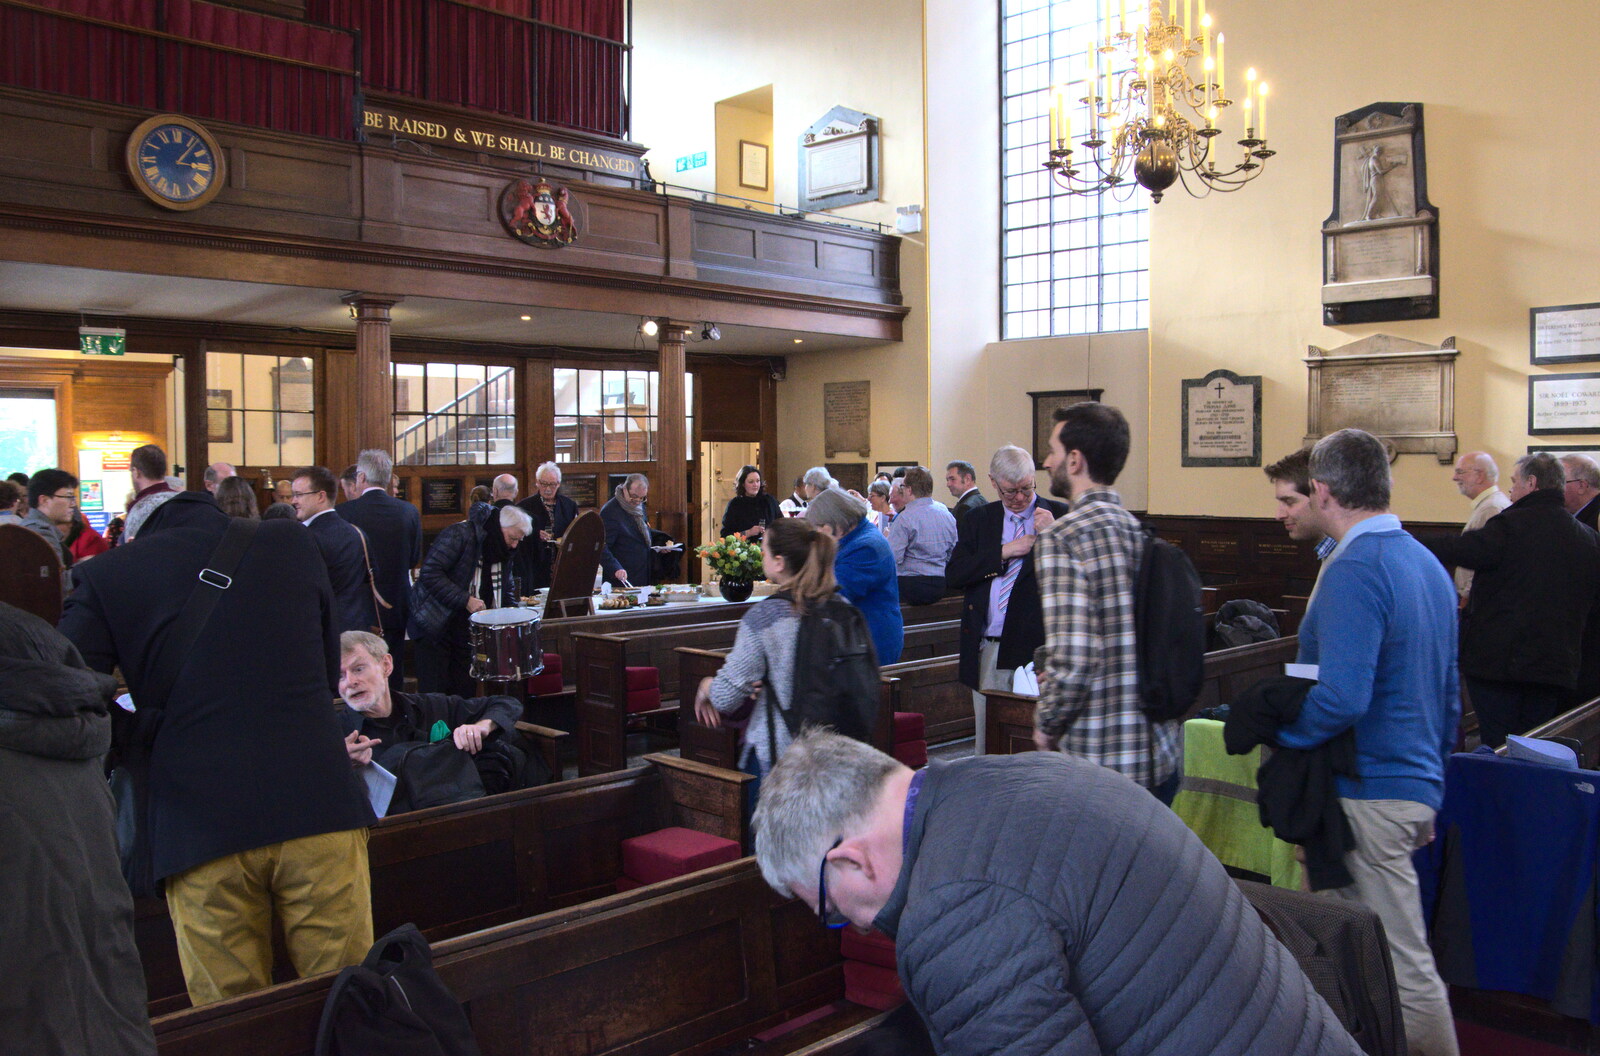 The congregation files out after the service from A SwiftKey Memorial Service, Covent Garden, London  - 13th March 2020